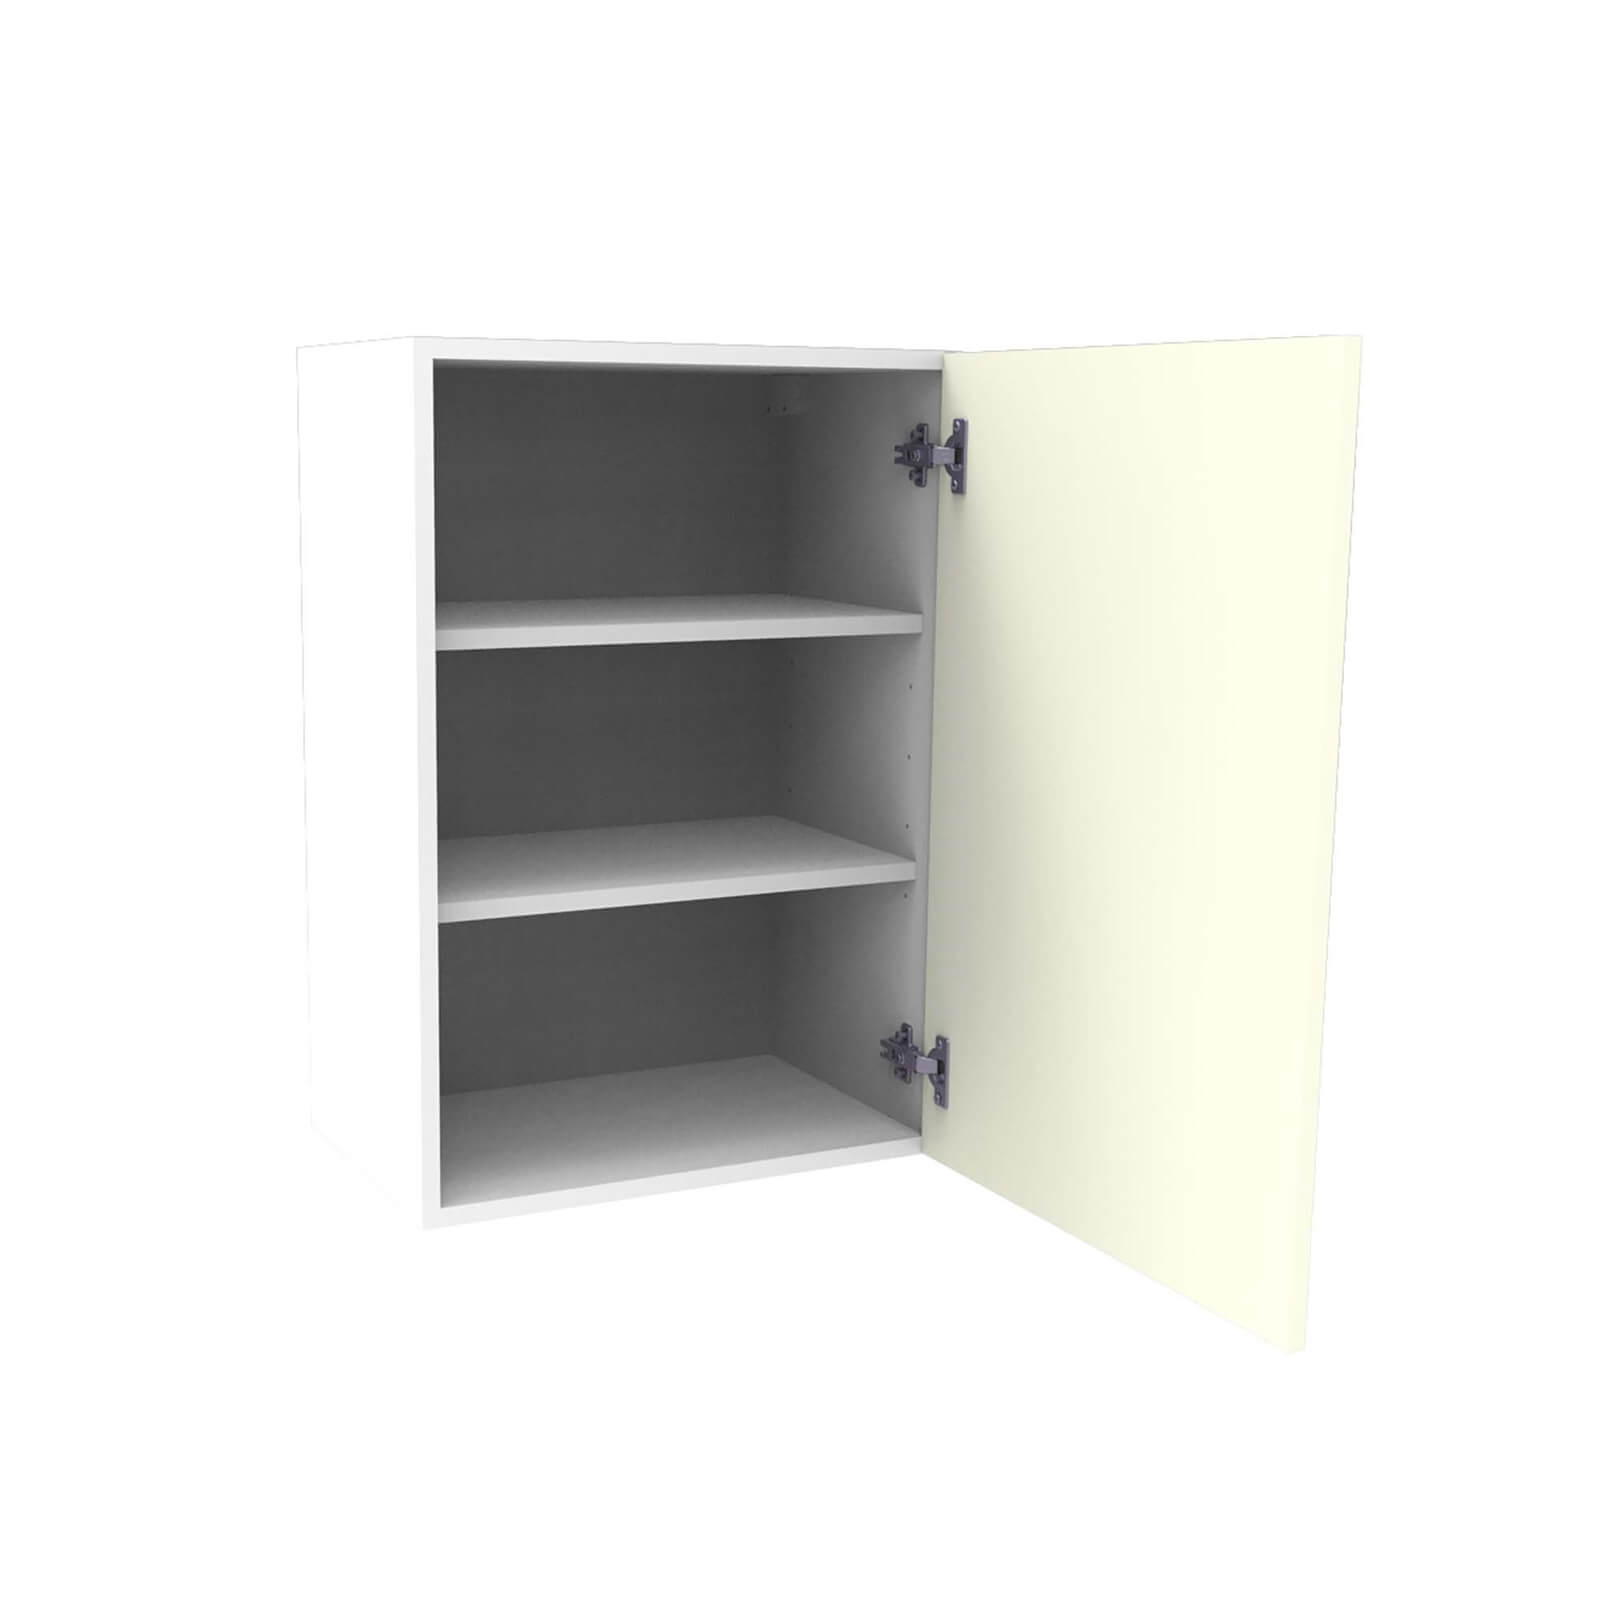 Country Shaker Cream 500mm Wall Unit